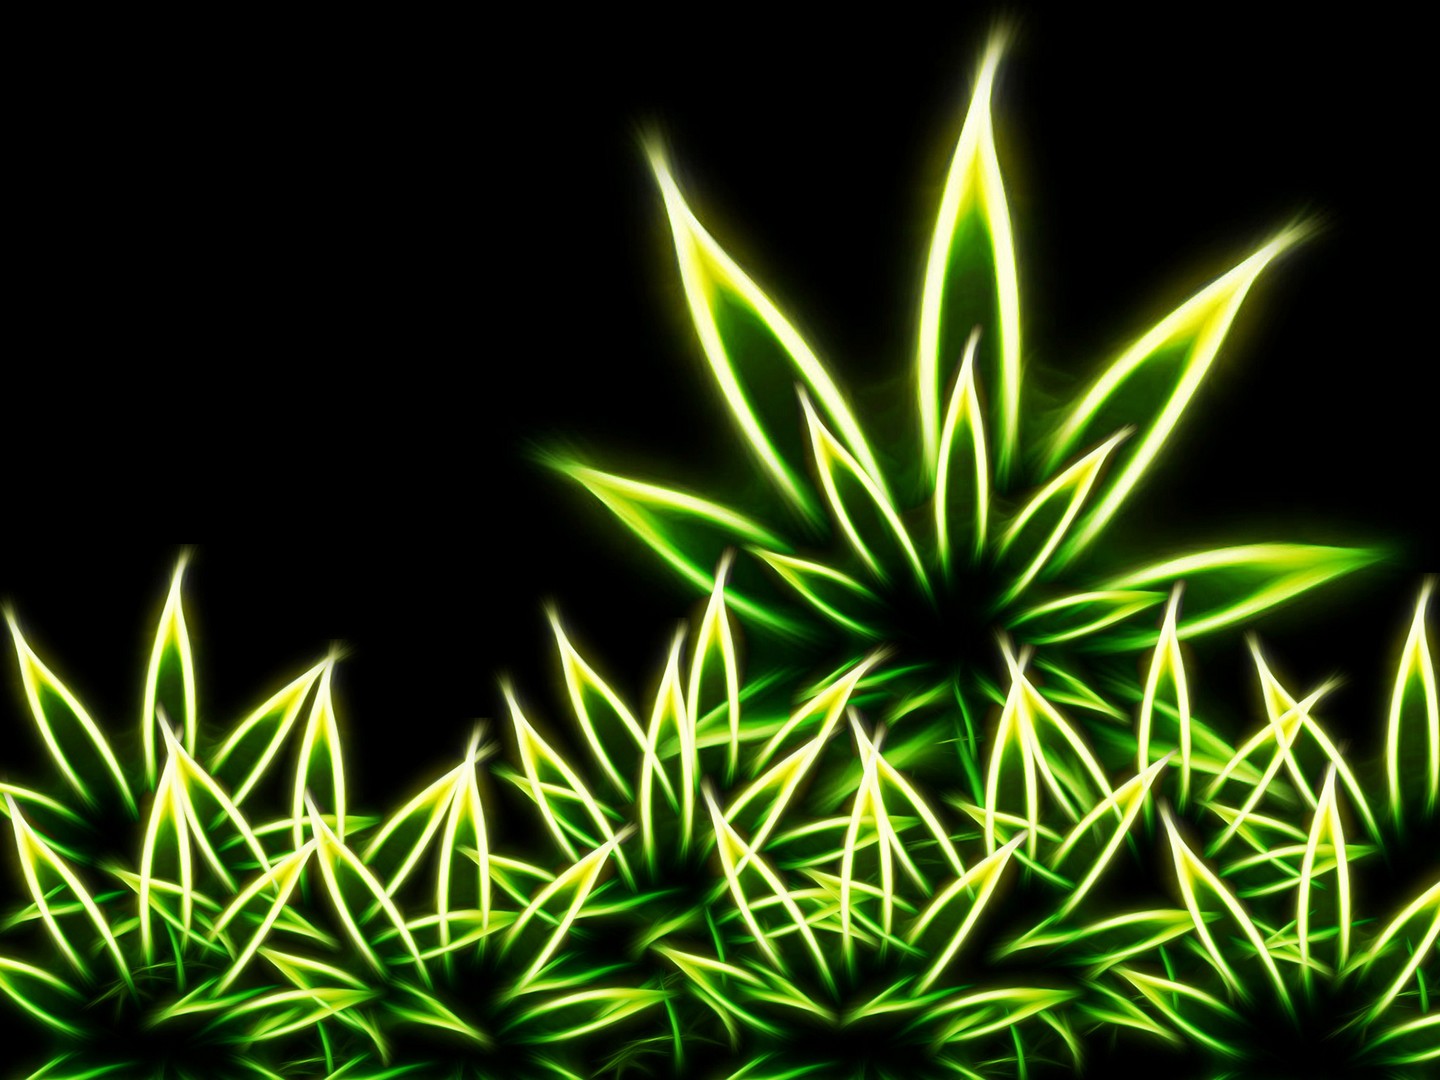 Share more than 70 stoner 420 wallpaper hd - in.cdgdbentre